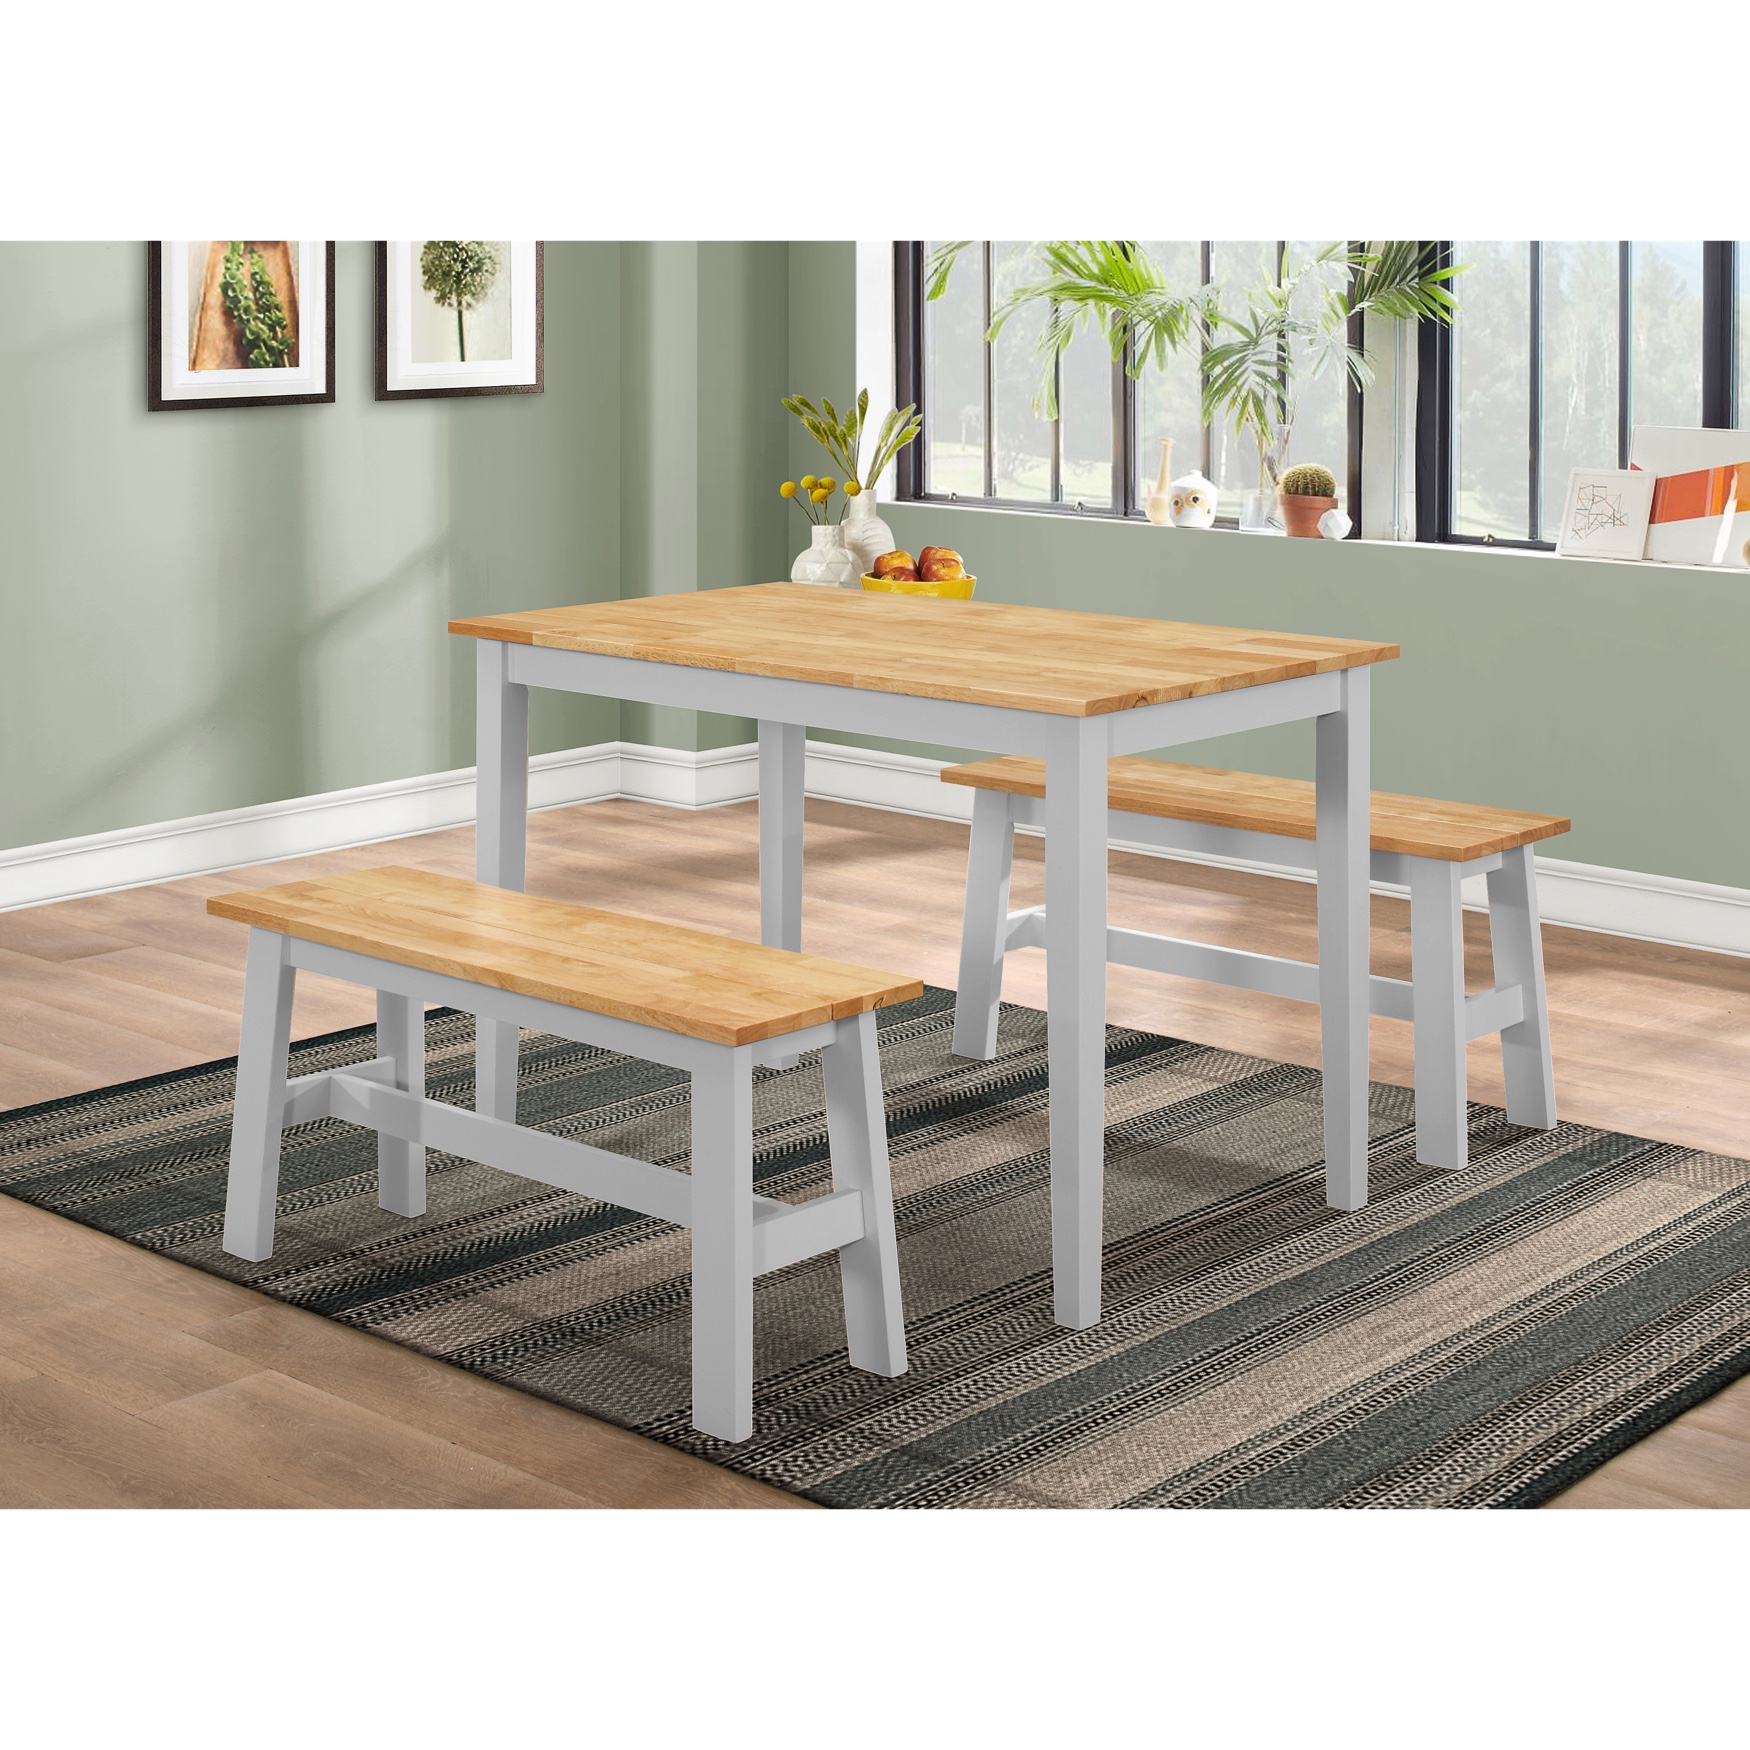 New York Wood Table with 2 Benches, White, NATURAL GRAY